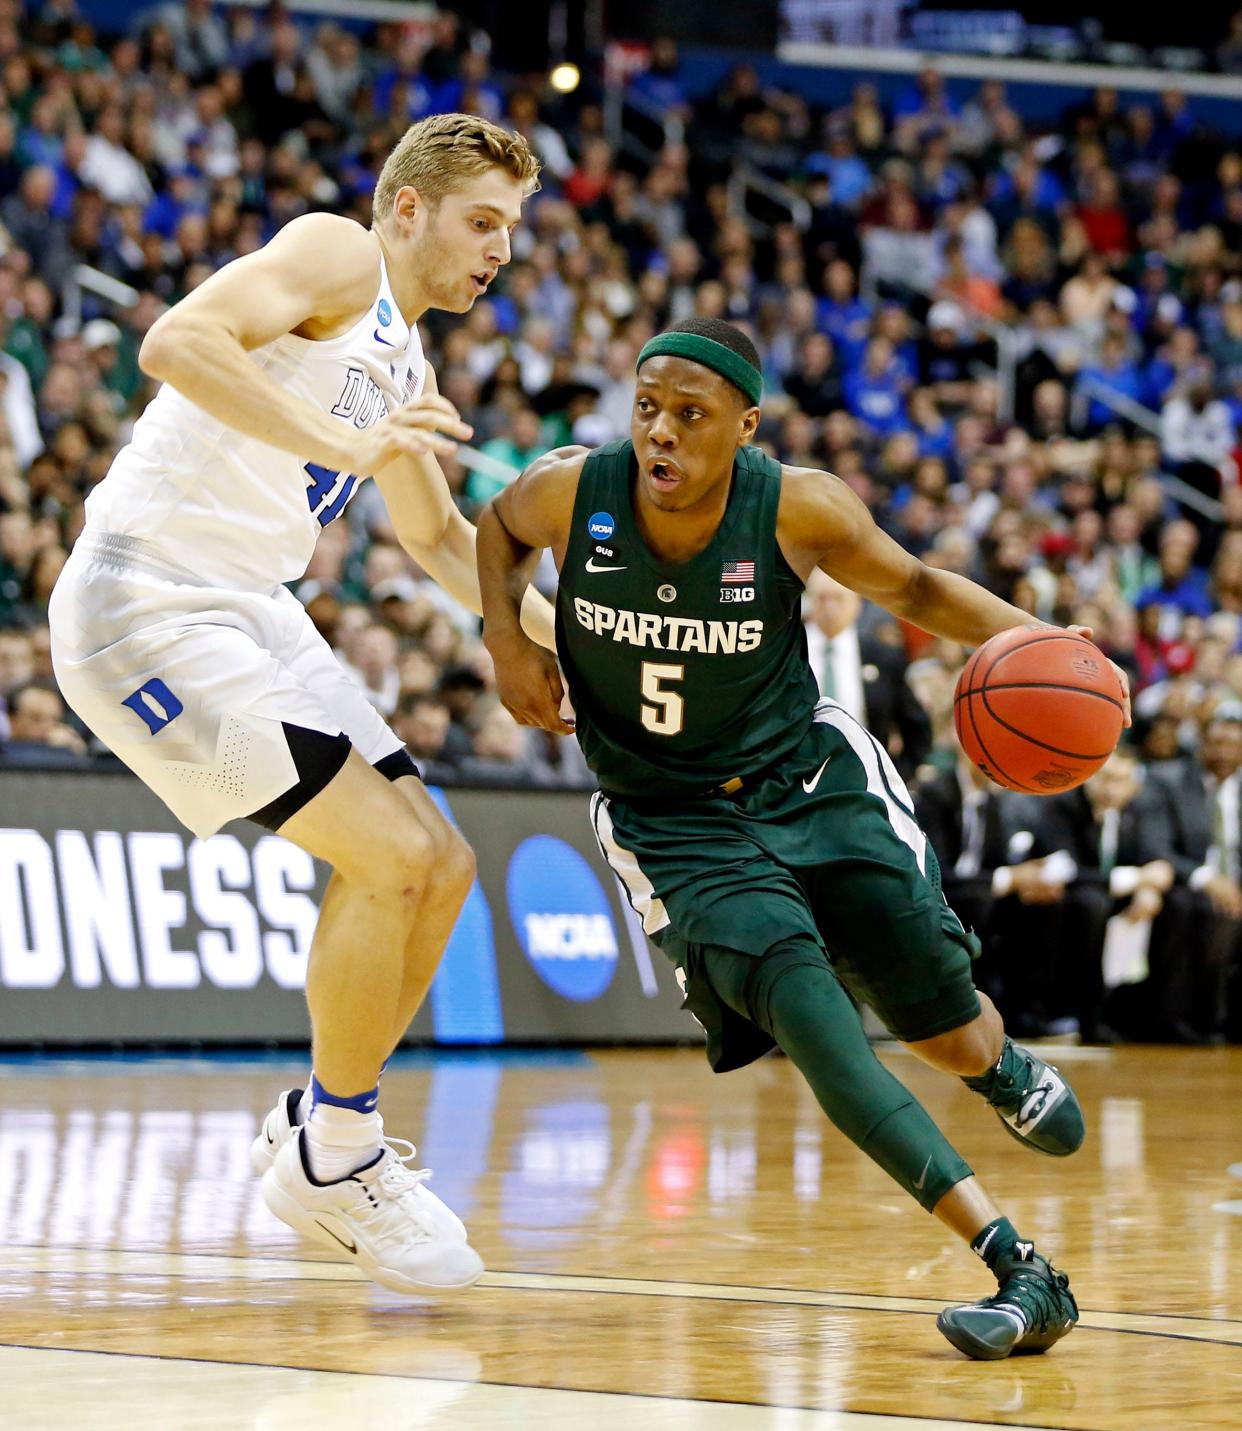 Mar 31, 2019; Washington, DC, USA; Michigan State Spartans guard Cassius Winston (5) drives to the basket against Duke Blue Devils forward Jack White (41) during the first half in the championship game of the east regional of the 2019 NCAA Tournament at Capital One Arena. Mandatory Credit: Amber Searls-USA TODAY Sports